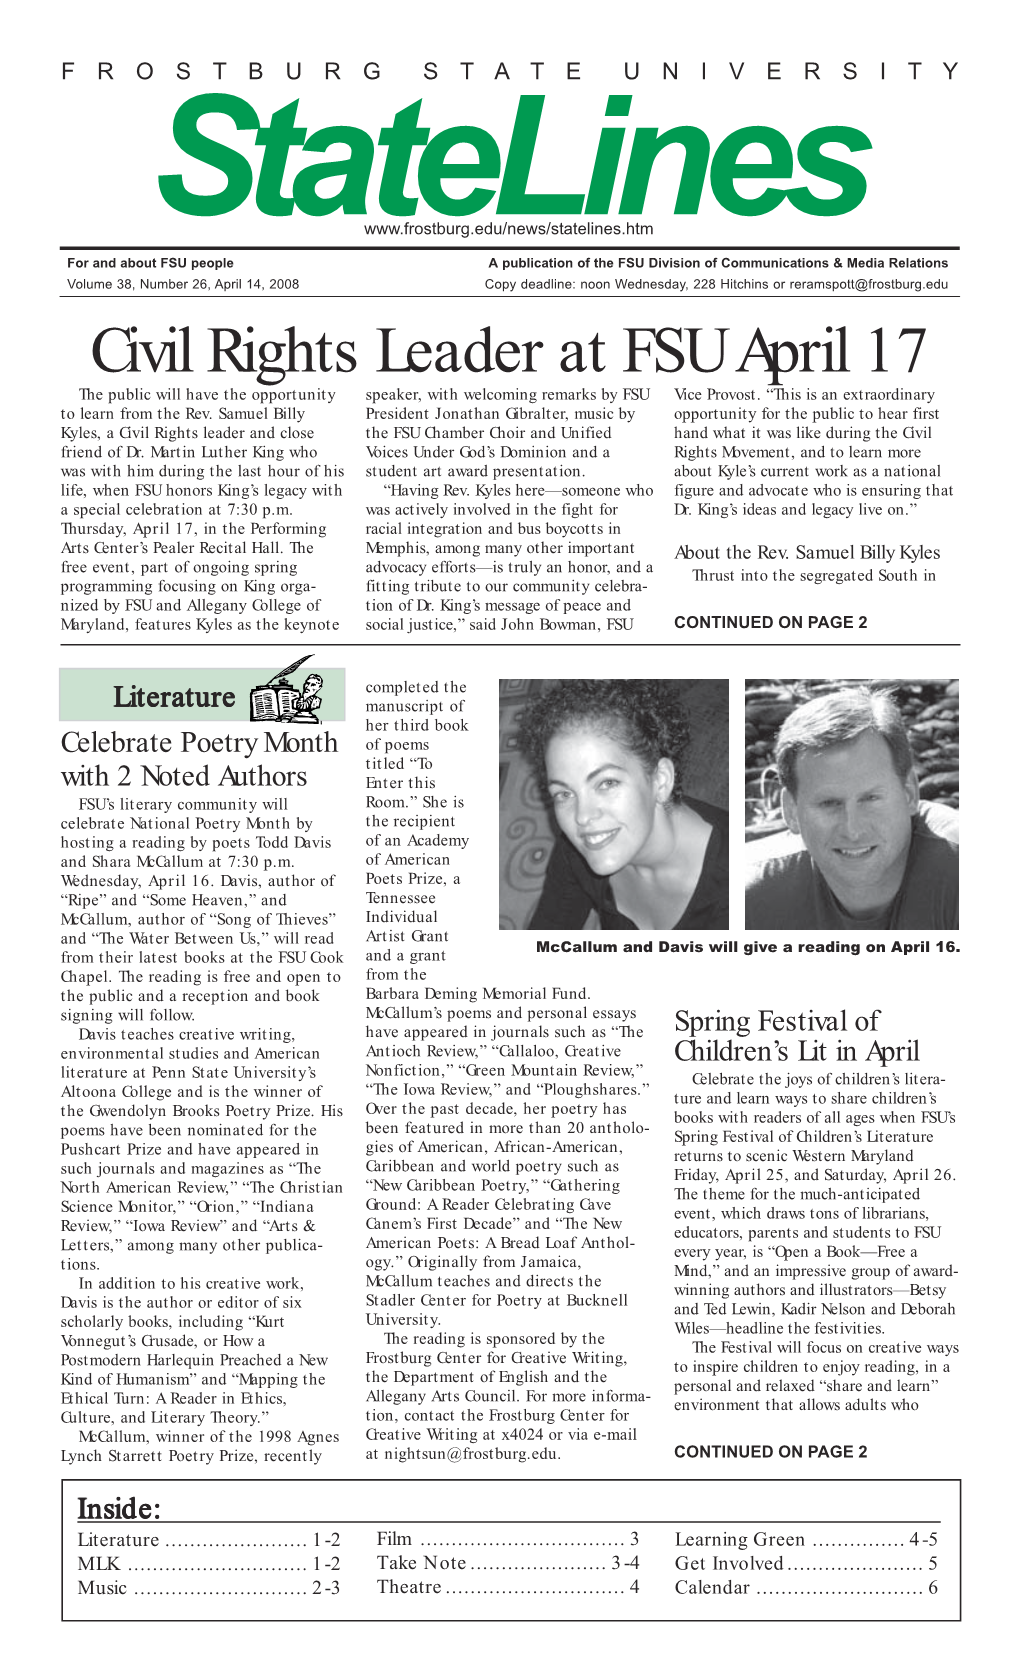 Civil Rights Leader at FSU April 17 the Public Will Have the Opportunity Speaker, with Welcoming Remarks by FSU Vice Provost